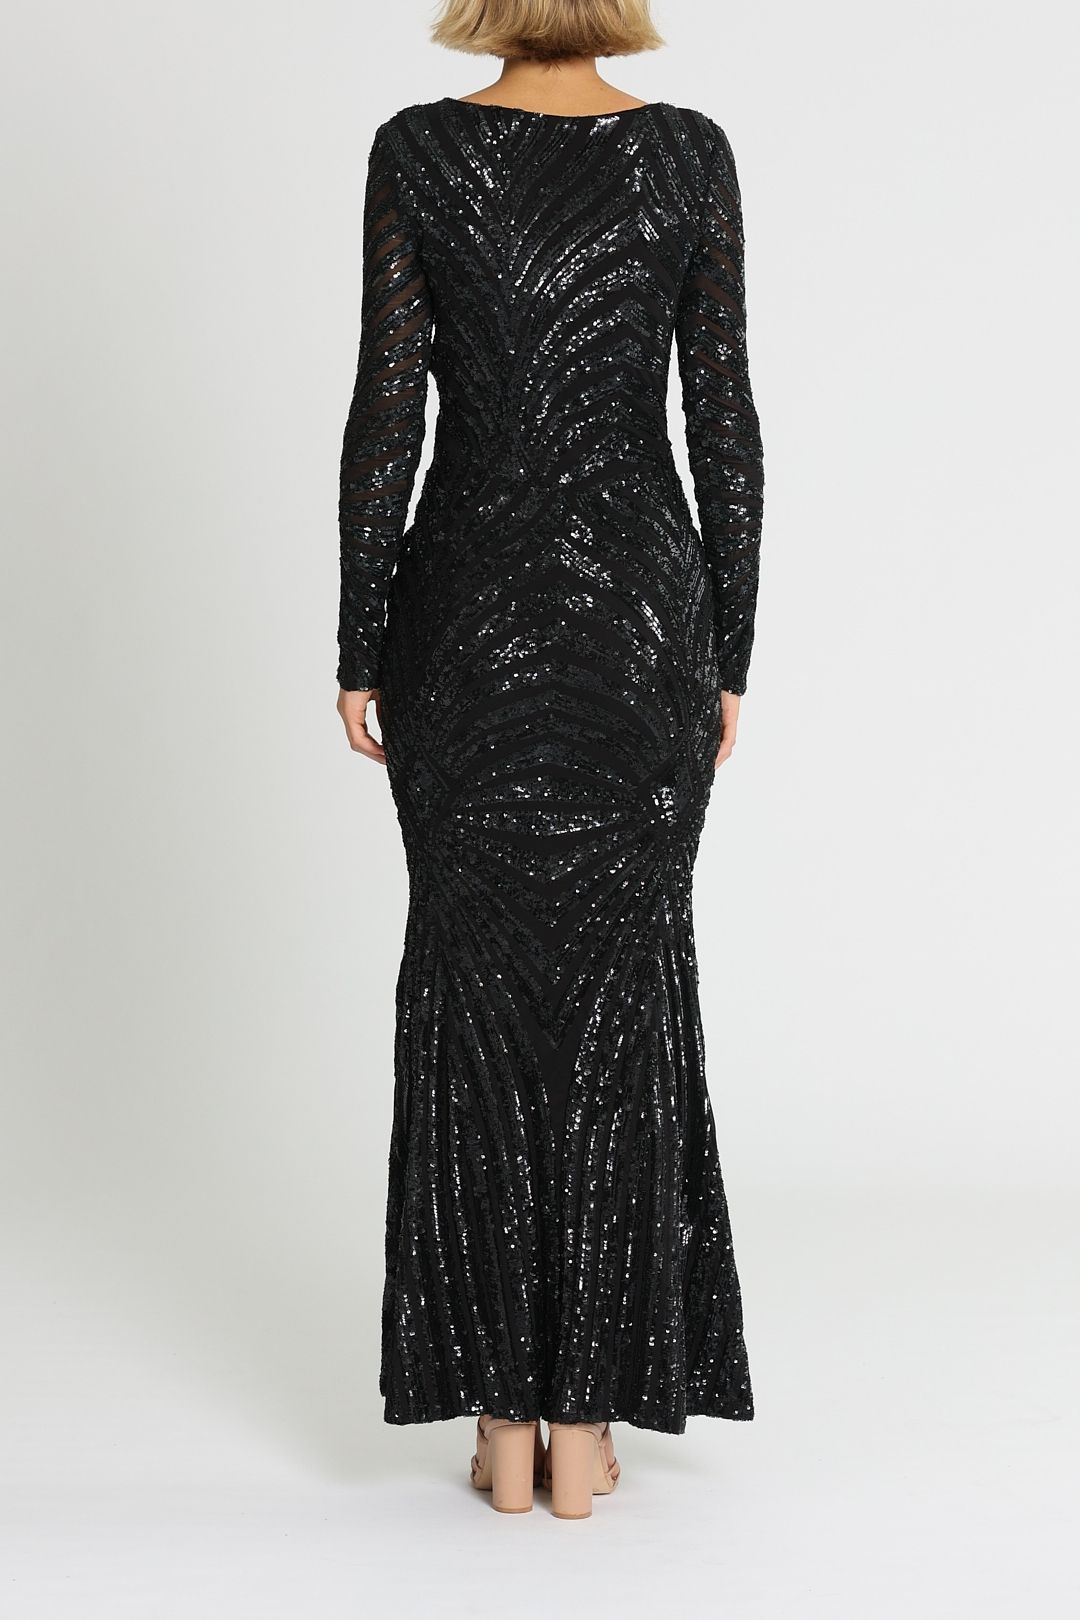 Ae'lkemi Art Deco Sequin Gown Black Long Sleeves